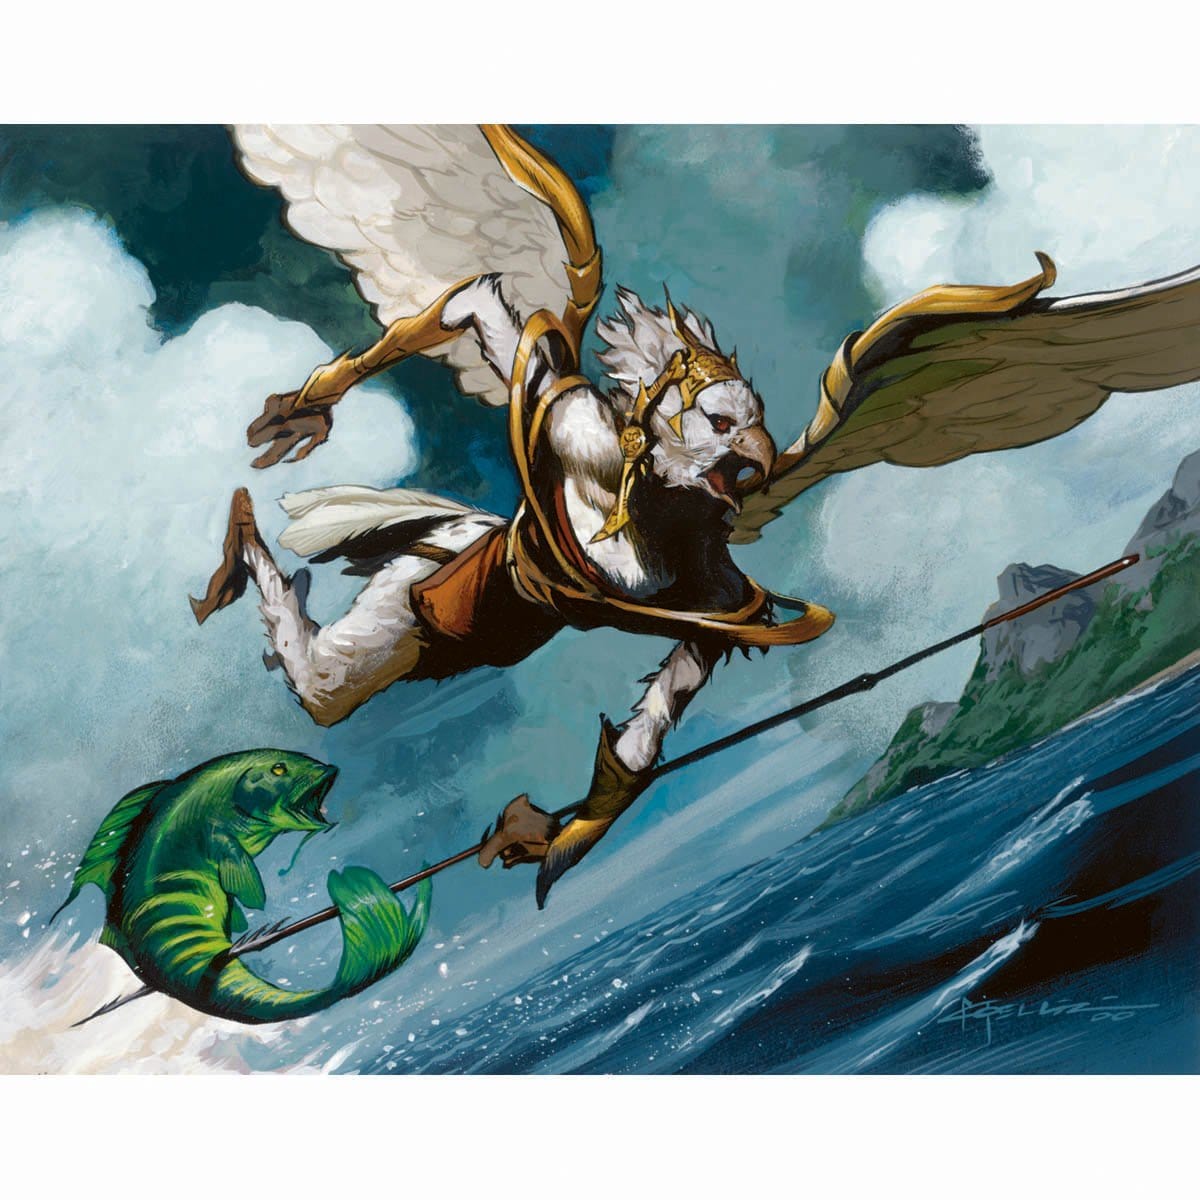 Aven Fisher Print - Print - Original Magic Art - Accessories for Magic the Gathering and other card games